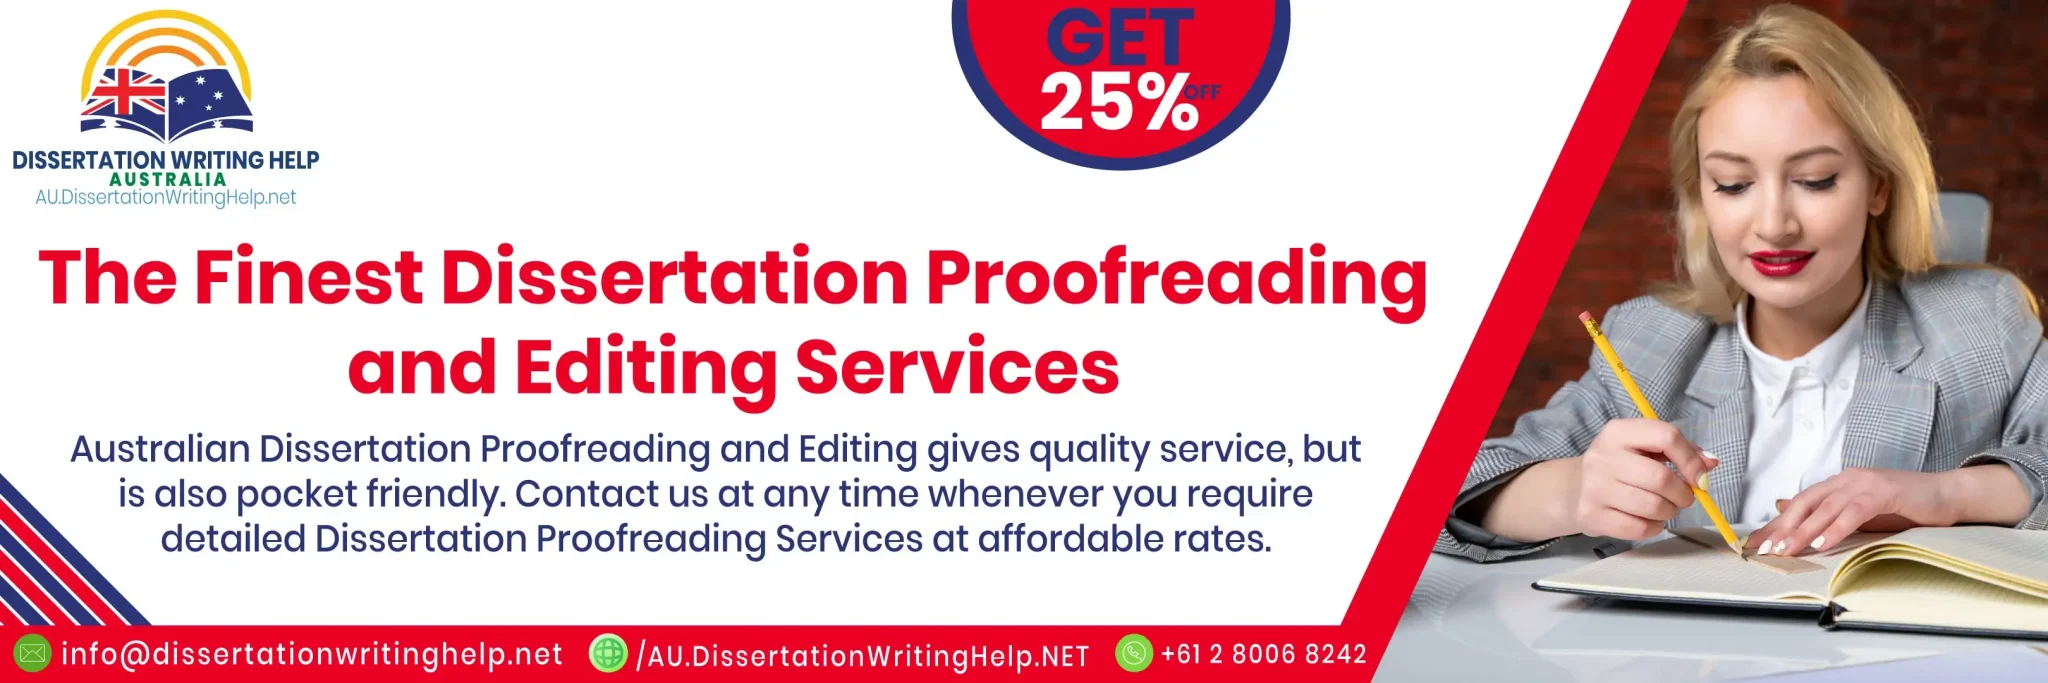 Dissertation Proofreading and Editing Services Australia